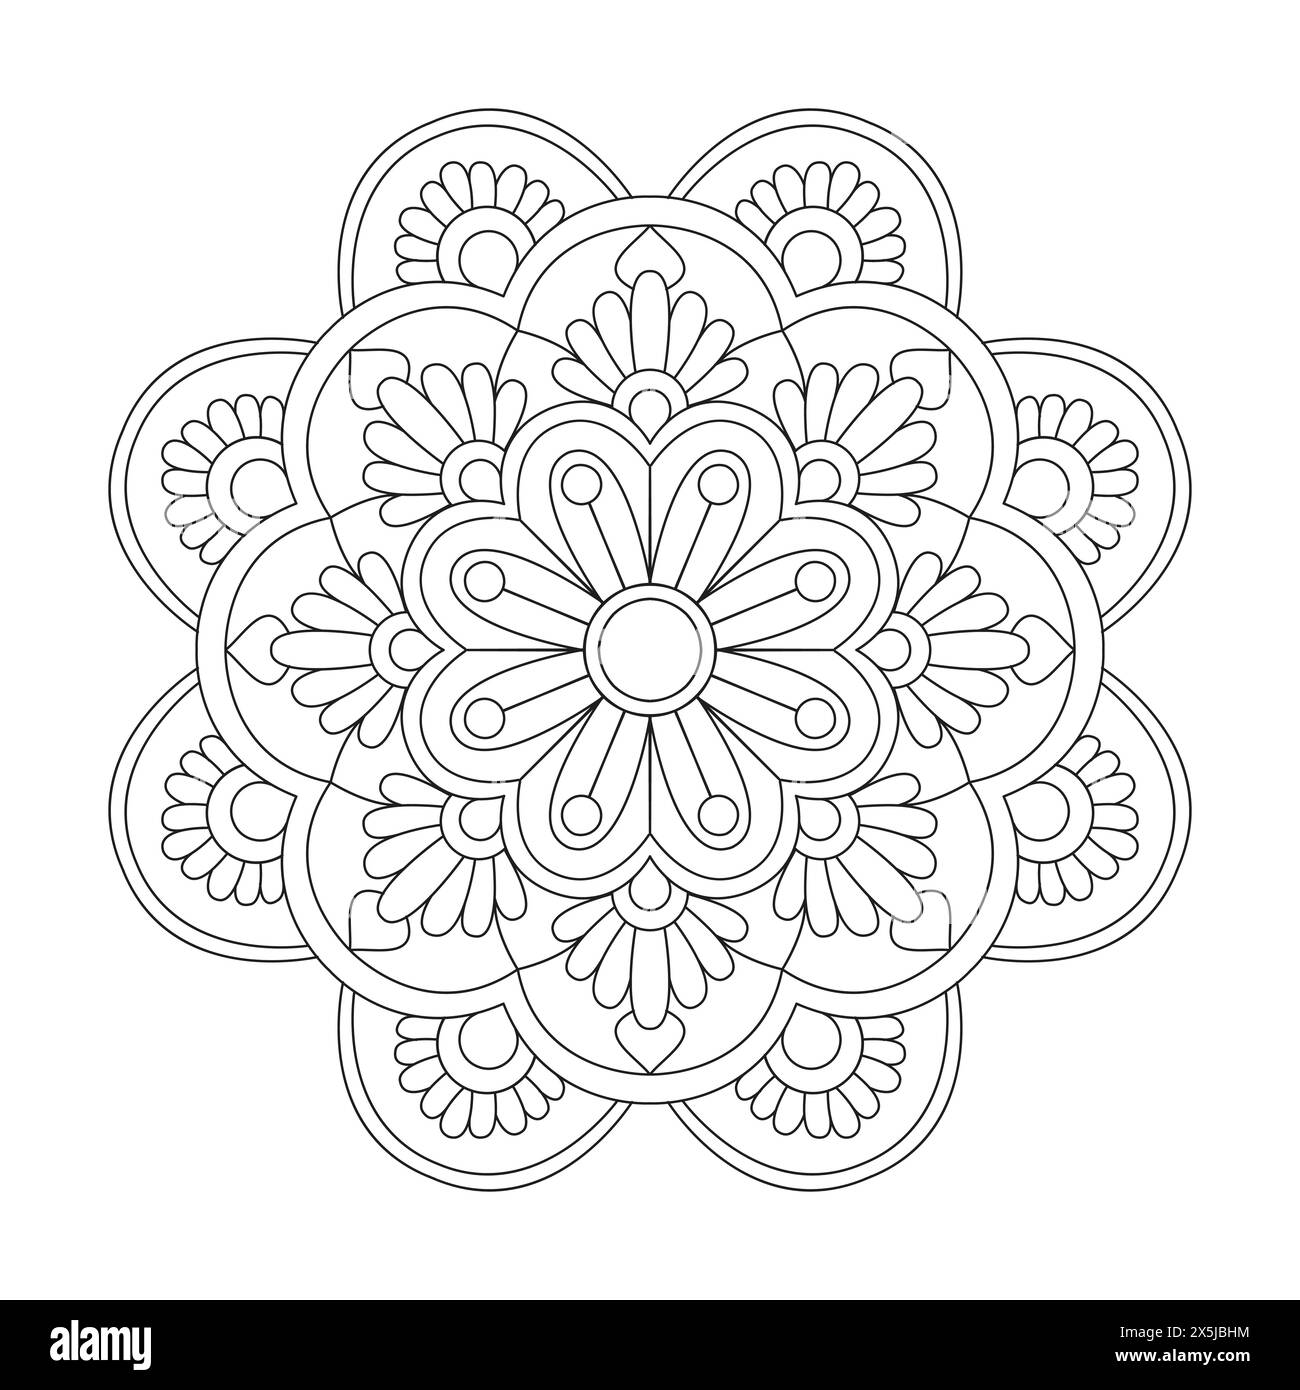 Fashionable Mandala Kids Colouring Book Page for KDP Book Interior. Peaceful Petals, Ability to Relax, Brain Experiences, Harmonious Haven, Peaceful Stock Vector